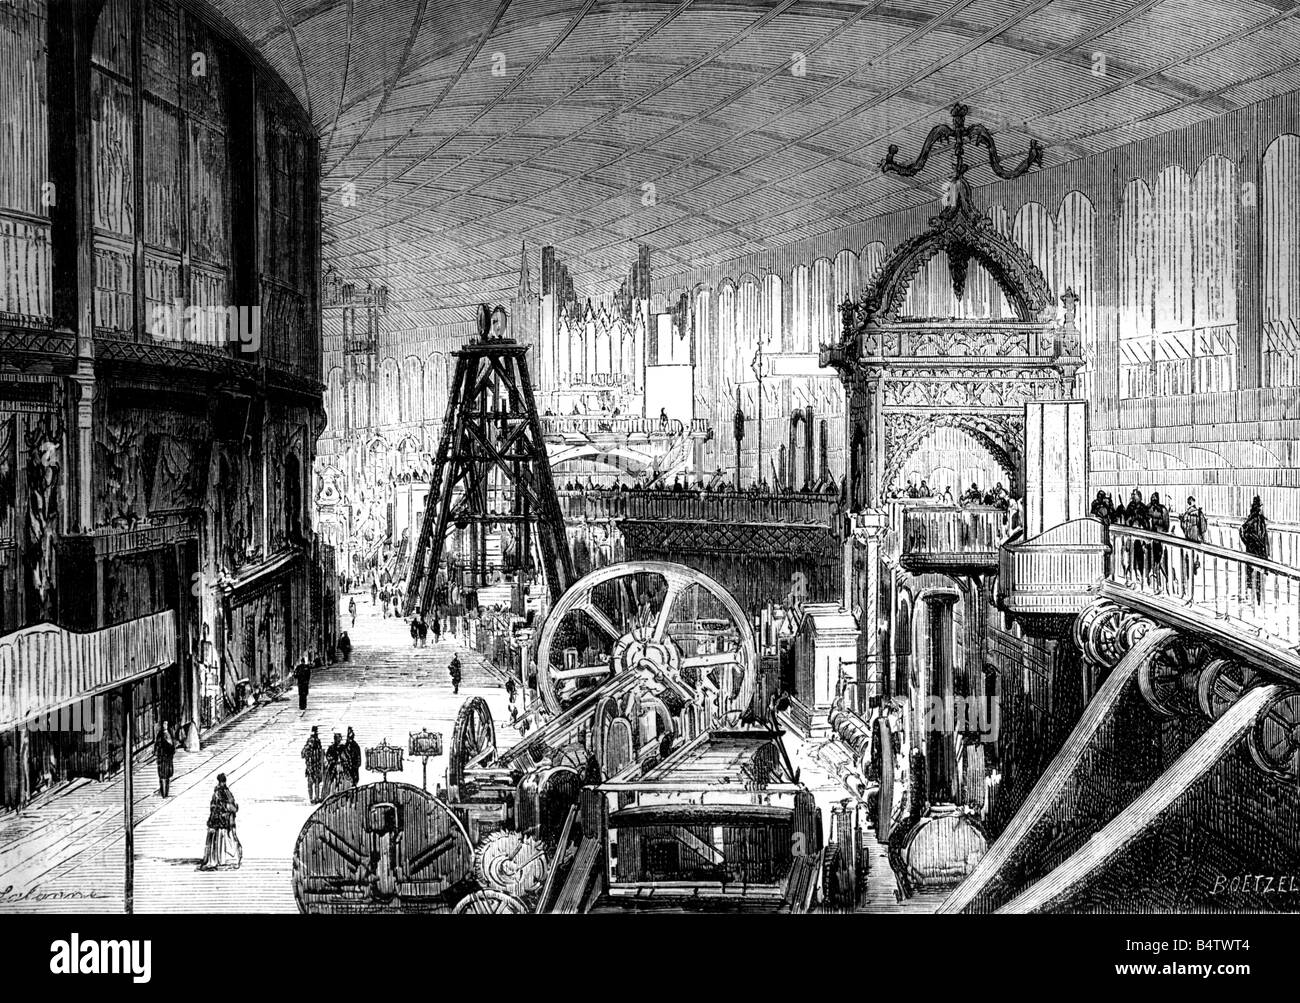 exhibitions, world exposition, Paris, 1.4.1867 - 31.12.1867, machine hall, wood engraving after drawing by Lalanne, 1867, Exposition Universelle, Expo, international exhibition, technics, machines, industry, France, 2nd Empire, 19th century, historic, historical, people, Stock Photo